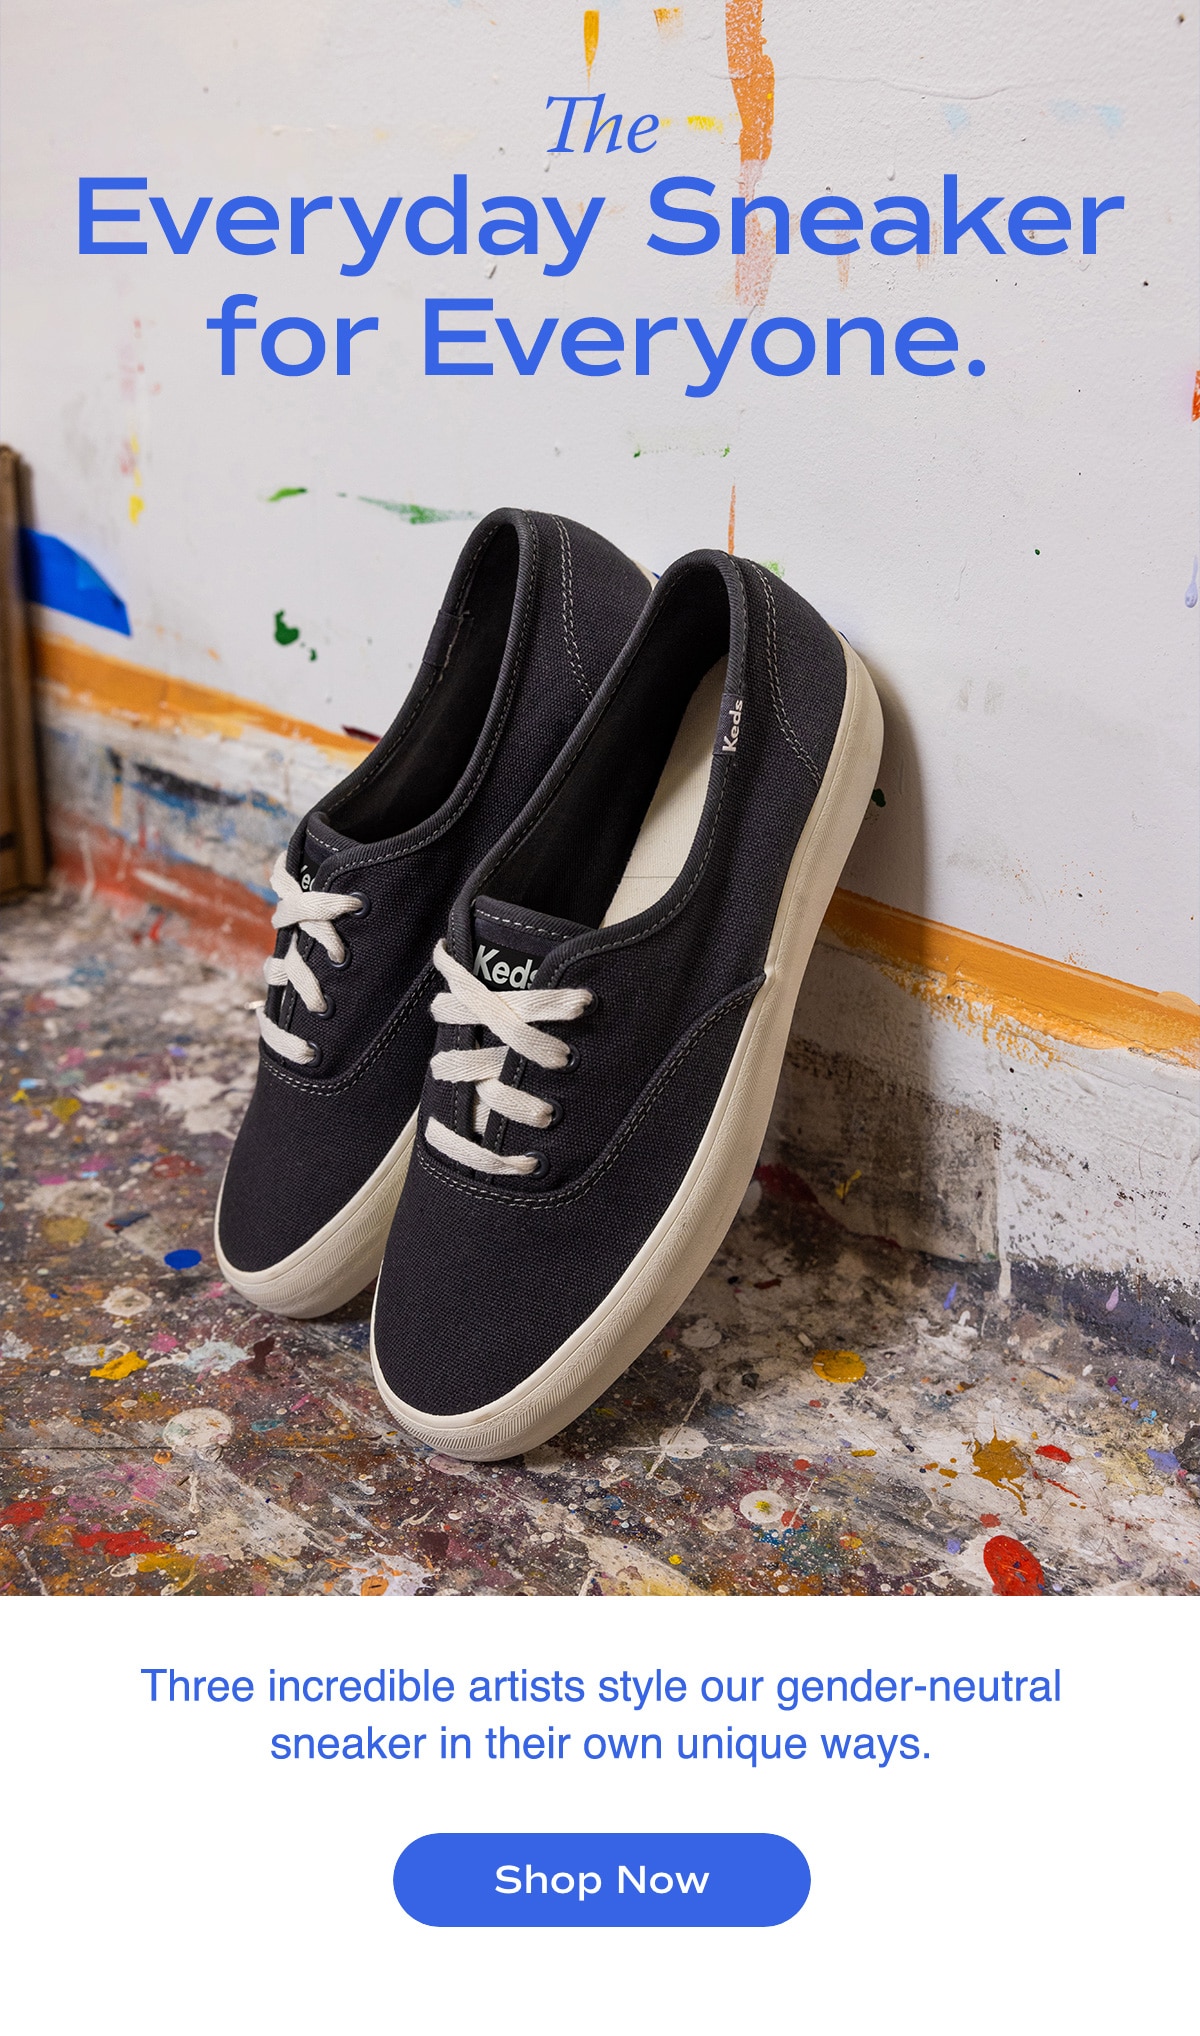 Just dropped: Our gender neutral sneaker. - Keds